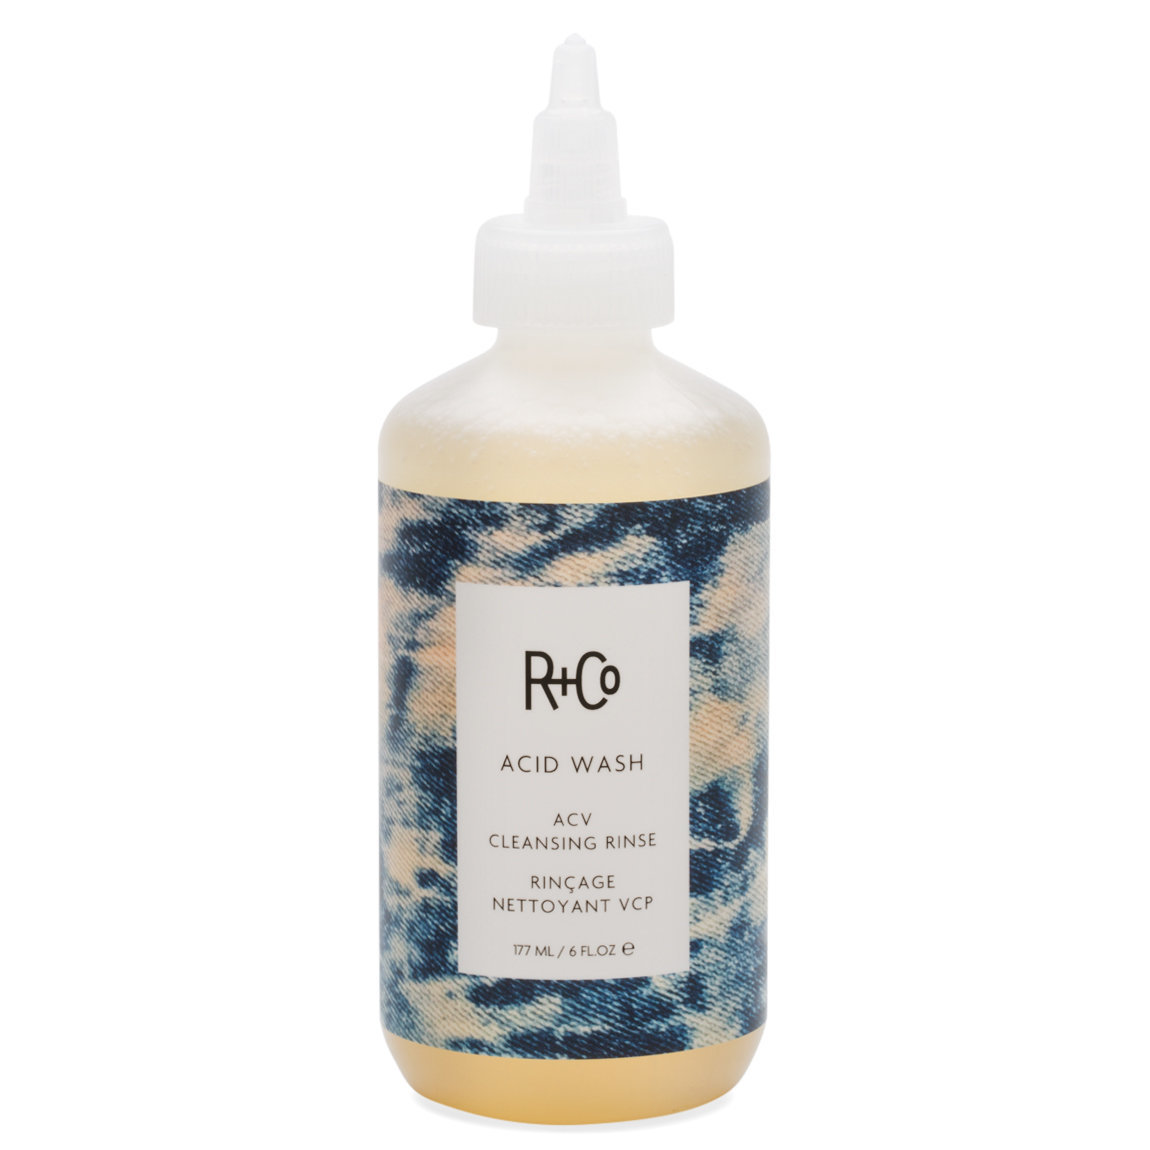 R+Co Acid Wash ACV Cleansing Rinse alternative view 1 - product swatch.